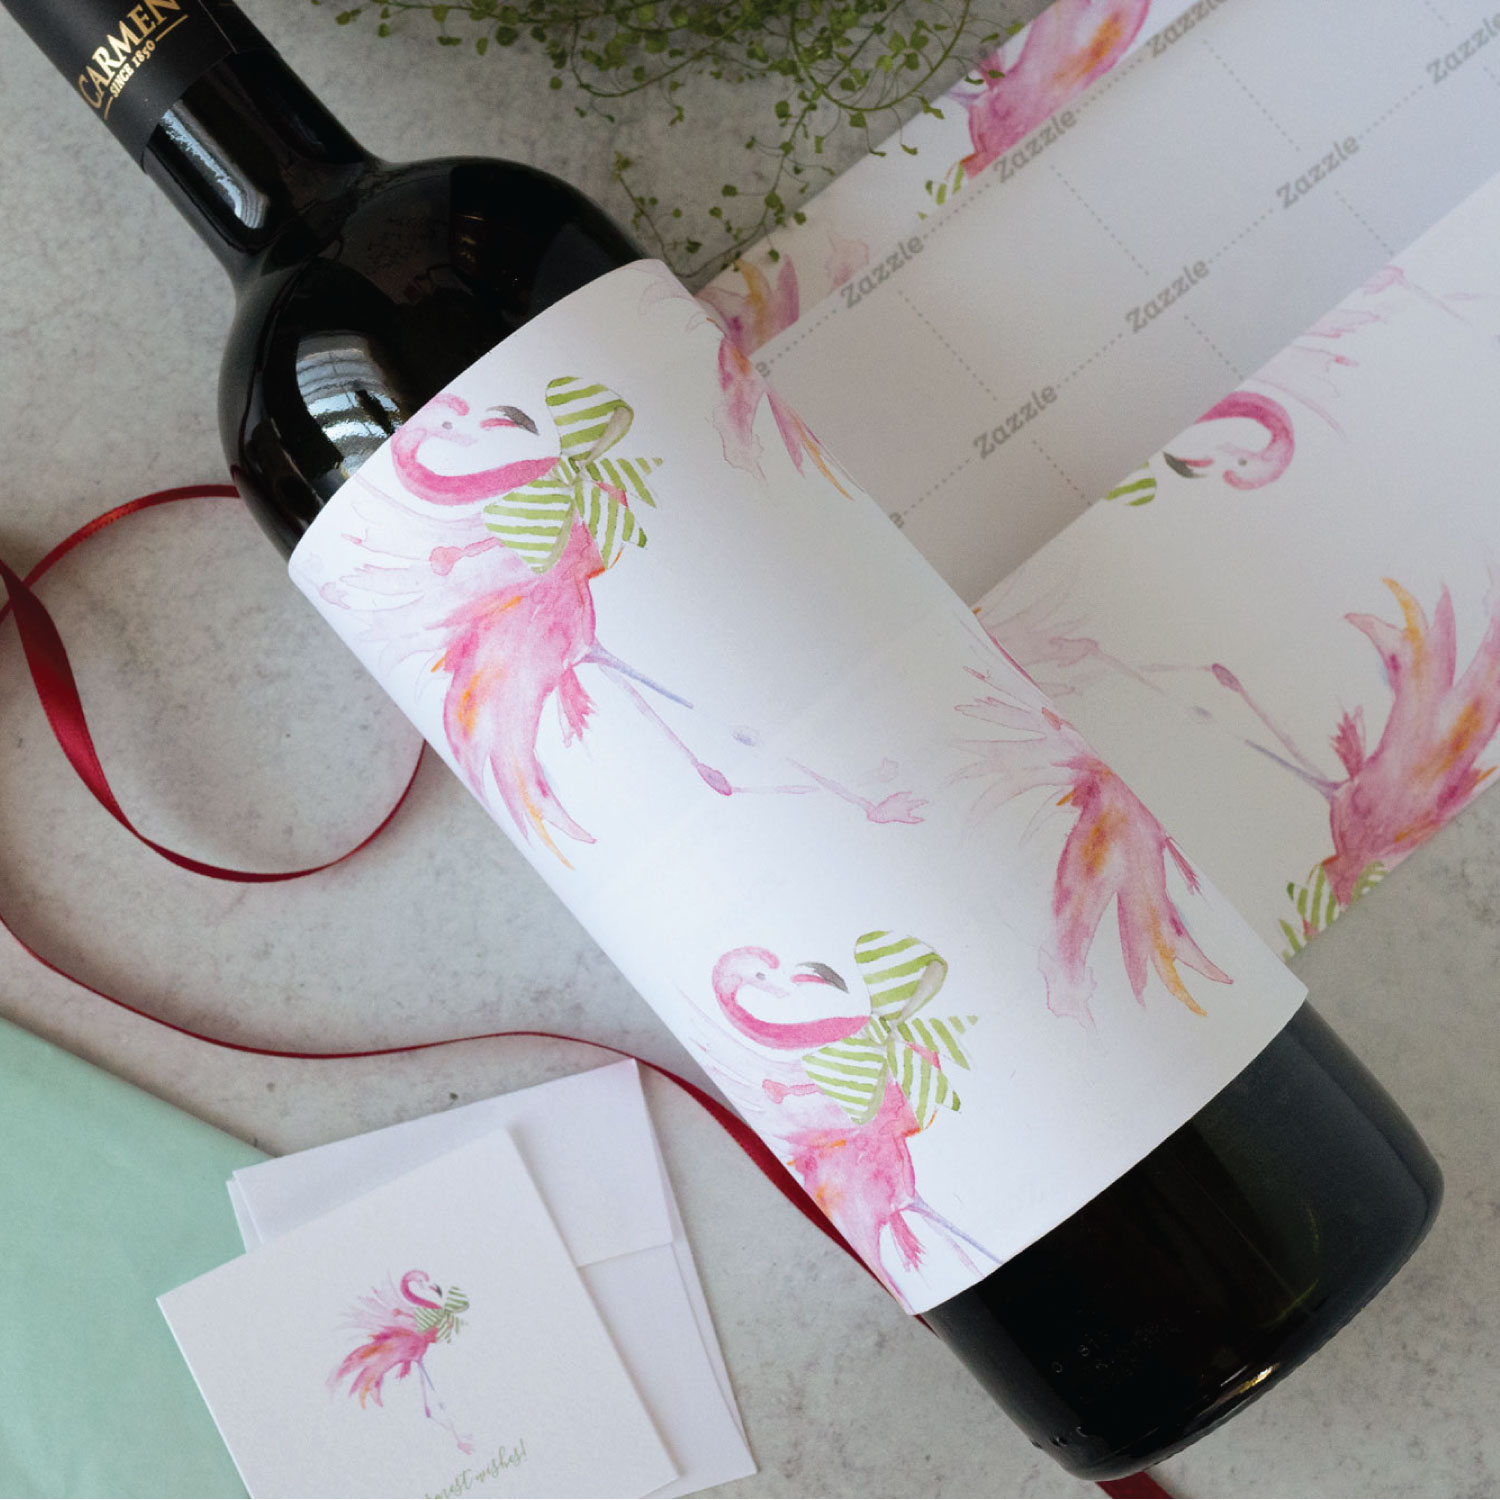 How to gift wrap a wine bottle using pink flamingo gift wrapping paper with guides by Victoria Grigaliunas